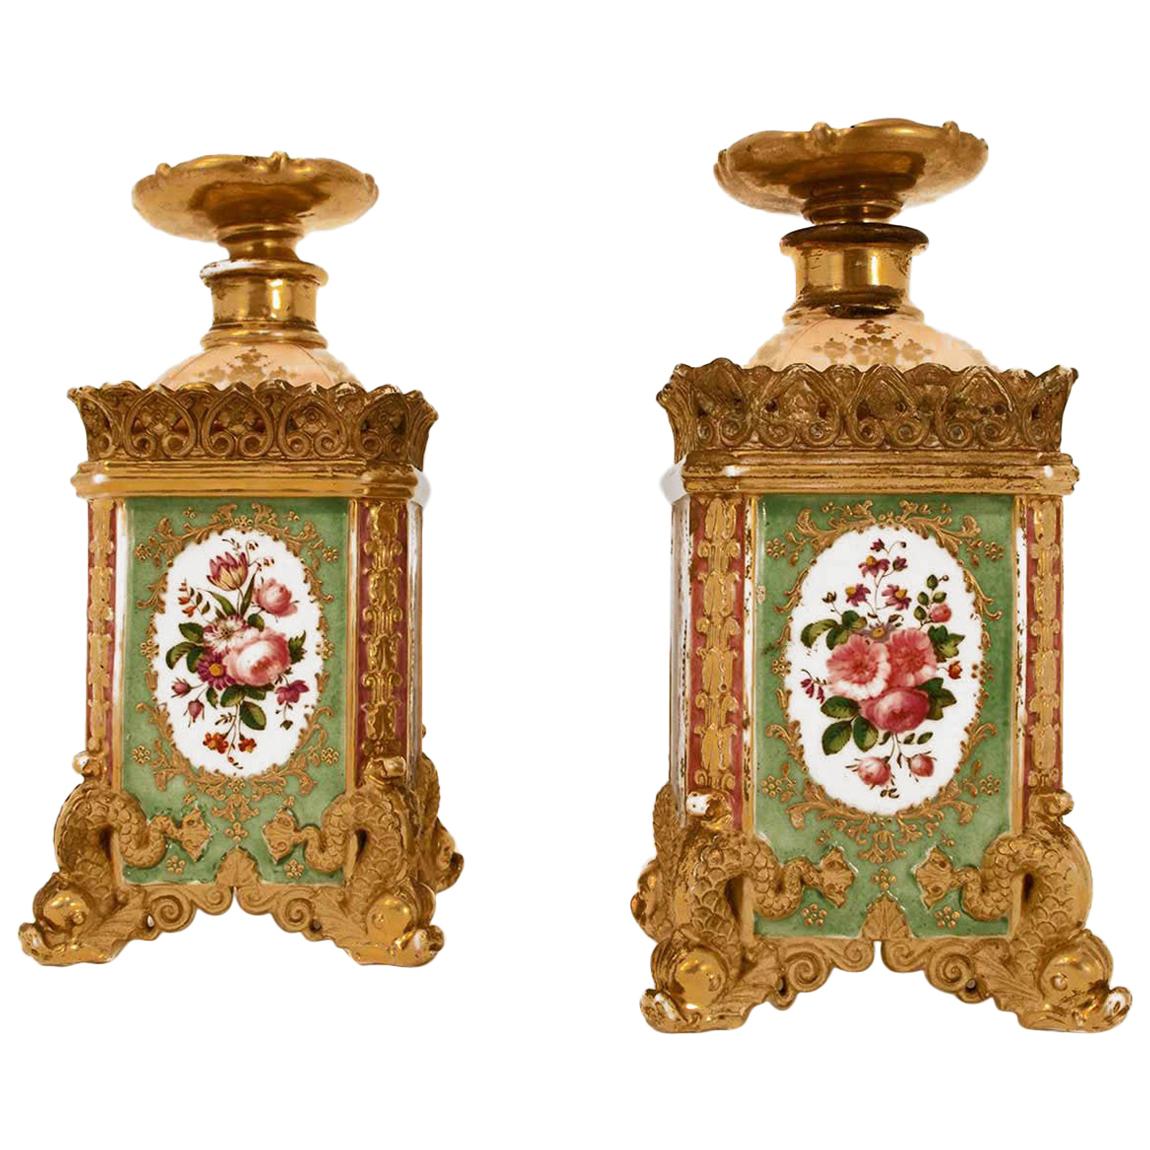 Jacob Petit, Pair of Flasks with Canted Corners in Enameled Porcelain, 1840